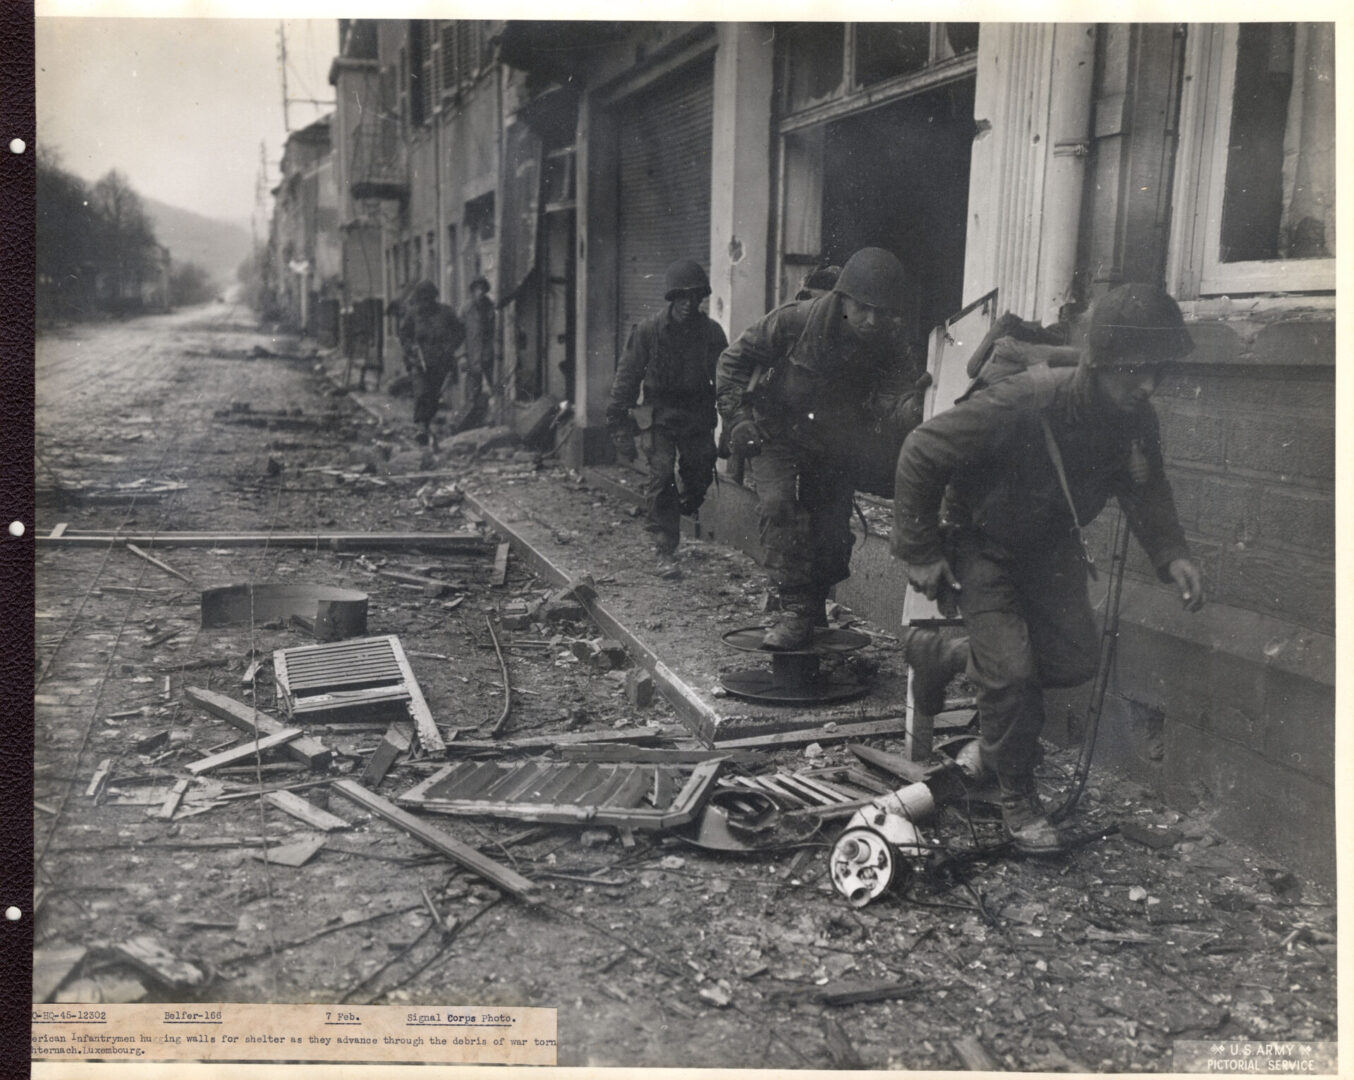 Infantrymen move cautiously taking cover of buildings